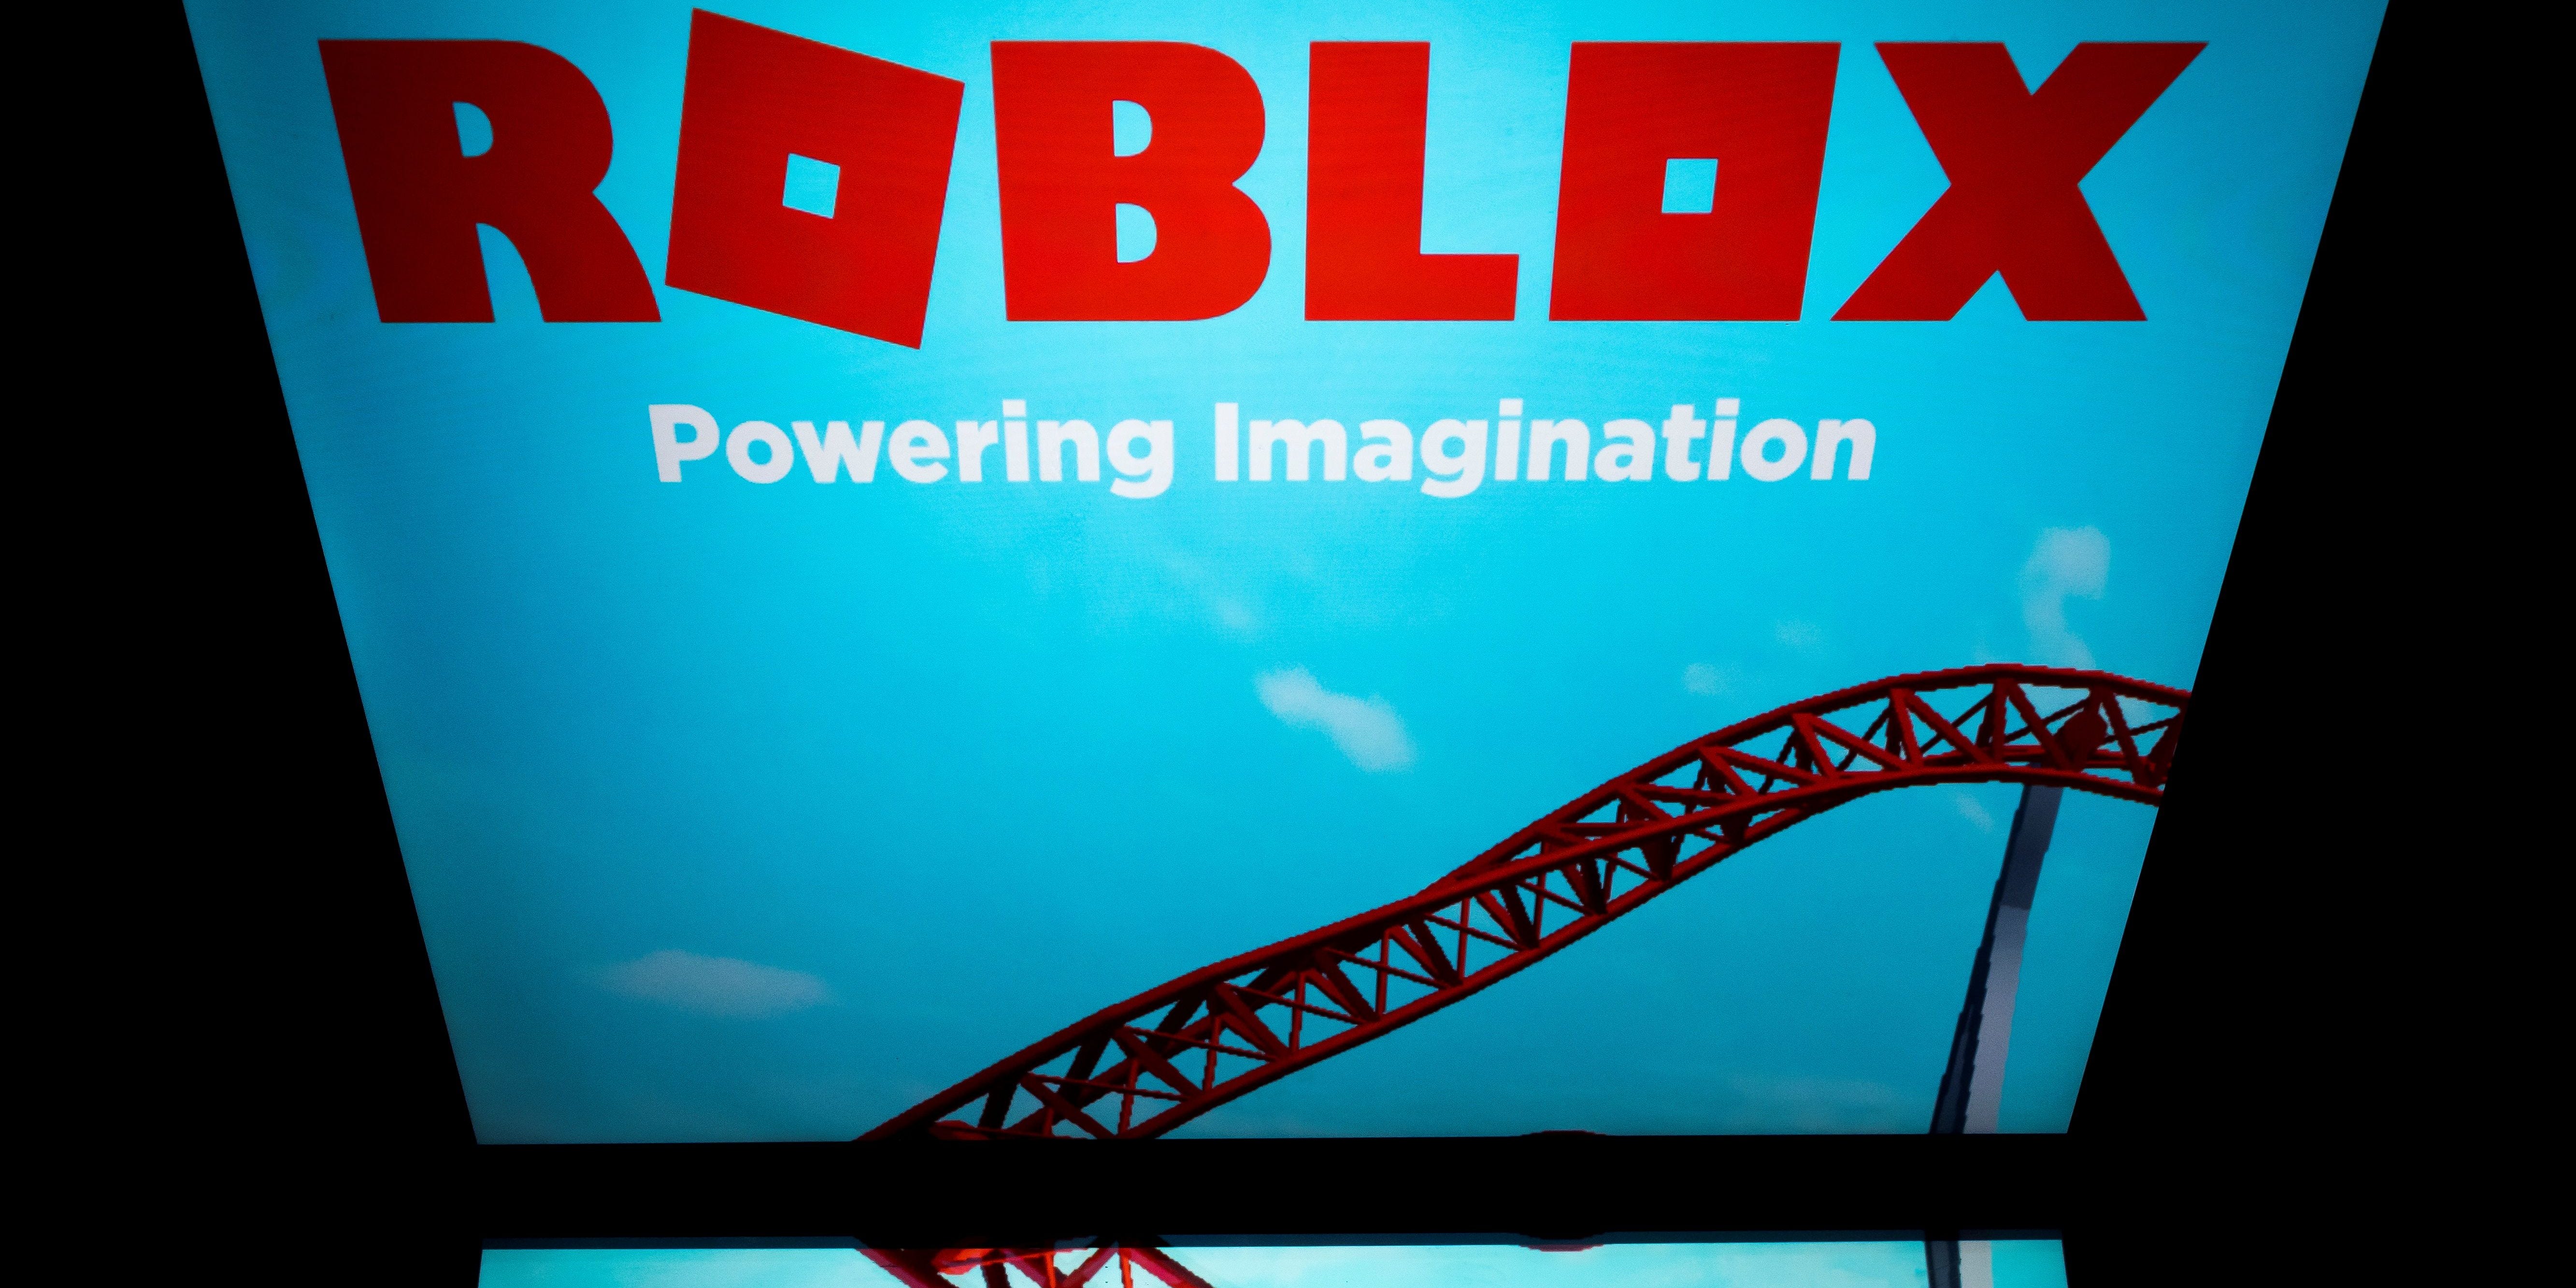 Roblox Customer Service Phone Number (888) 858-2569, Email, Help